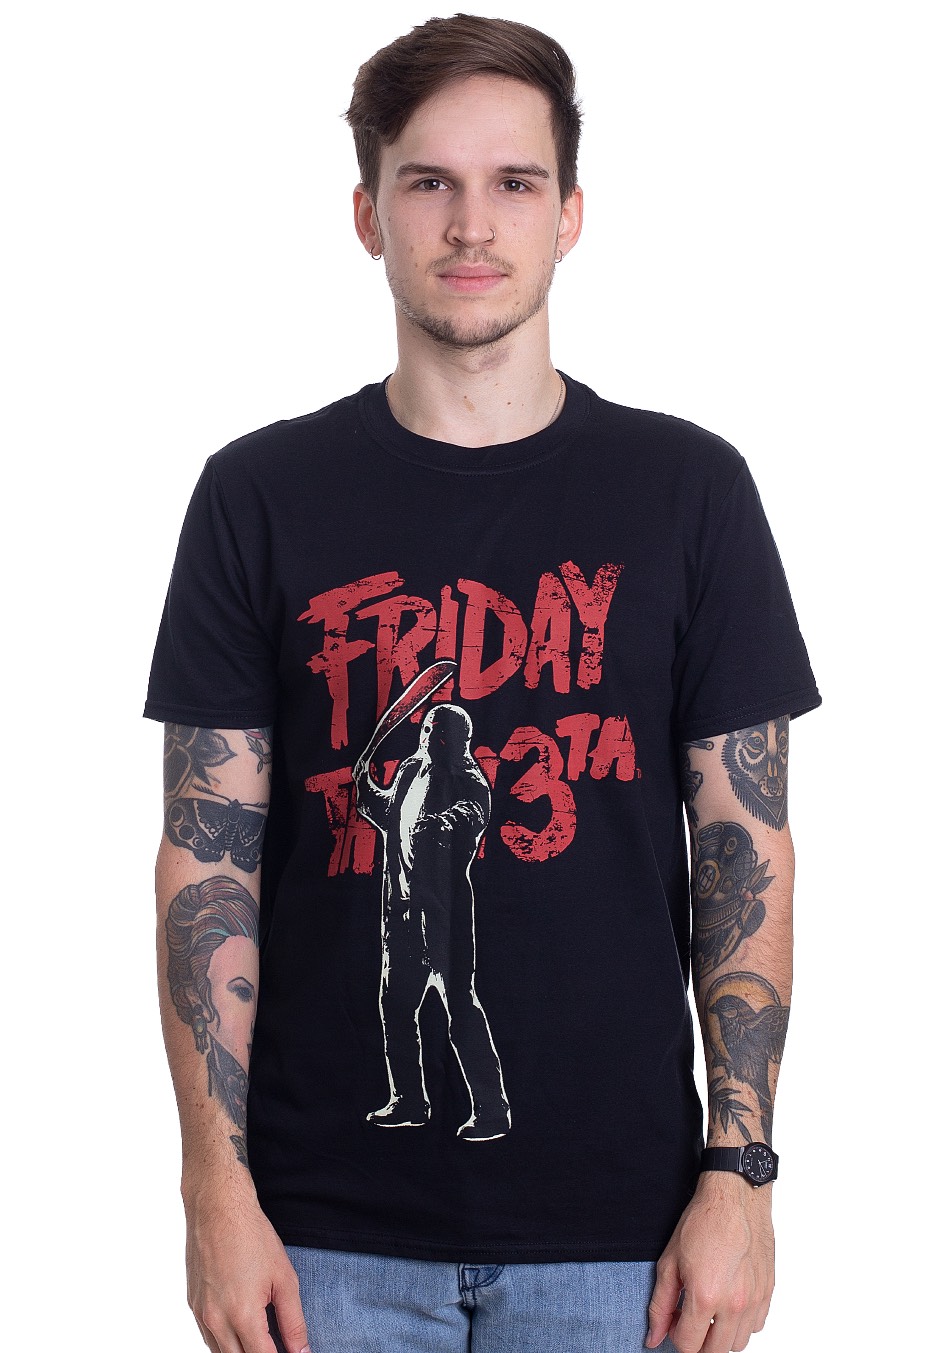 Friday The 13th - Jason Voorhees - - T-Shirts